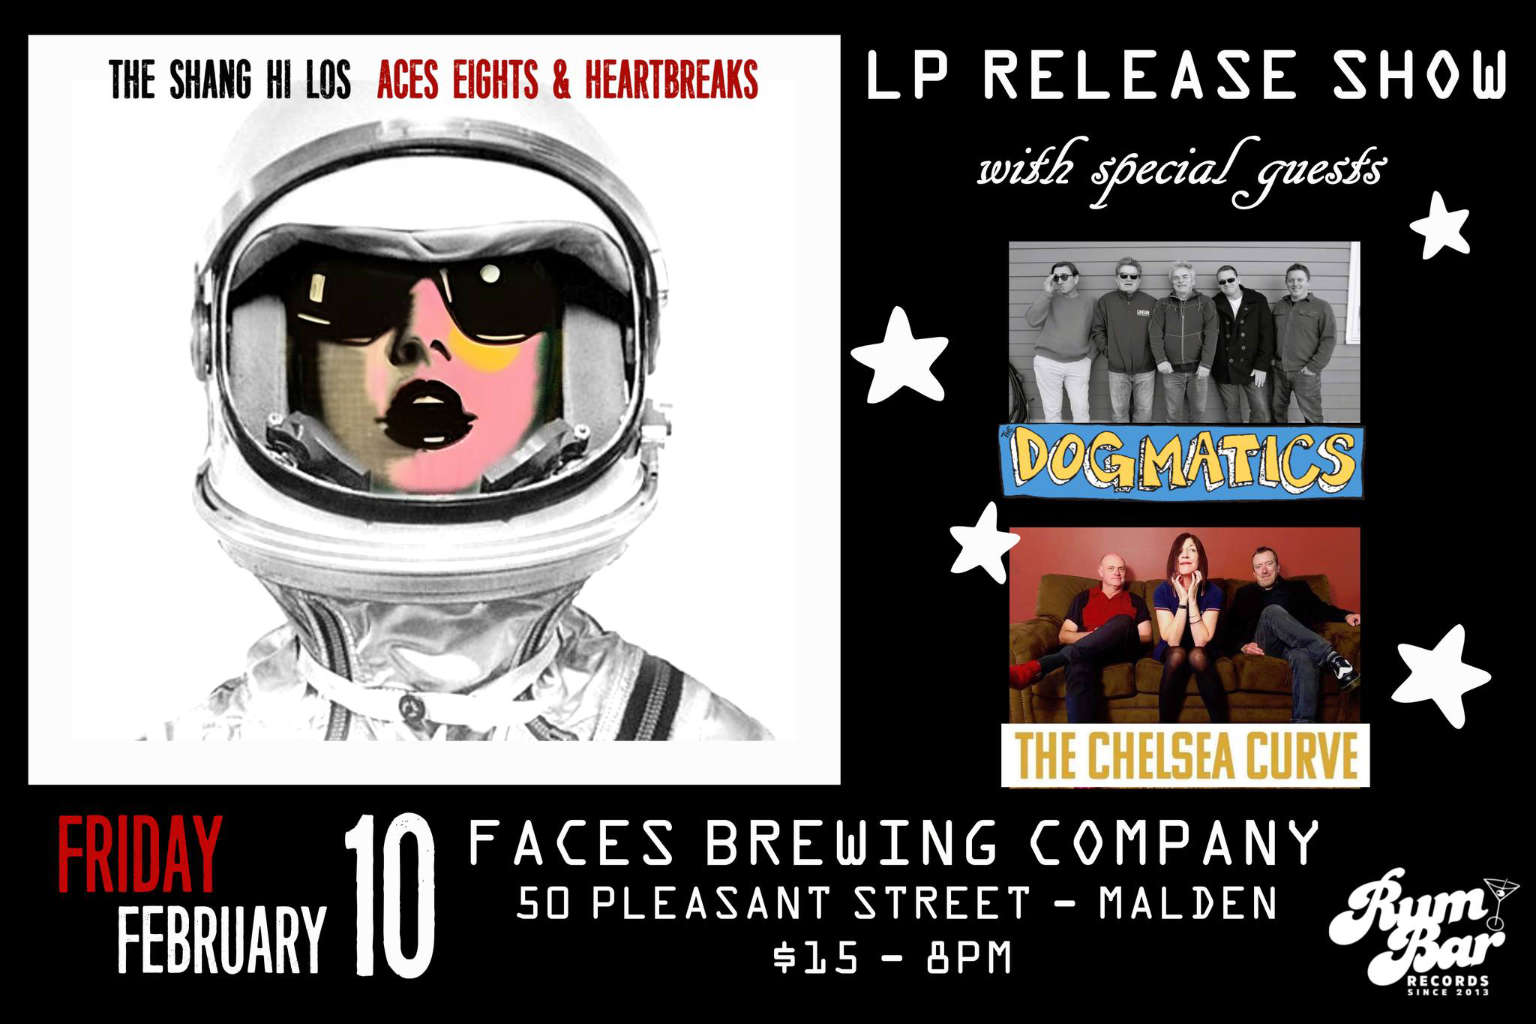 The Shang Hi Los, The Dogmatics, The Chelsea Curve at Faces Brewing Co.